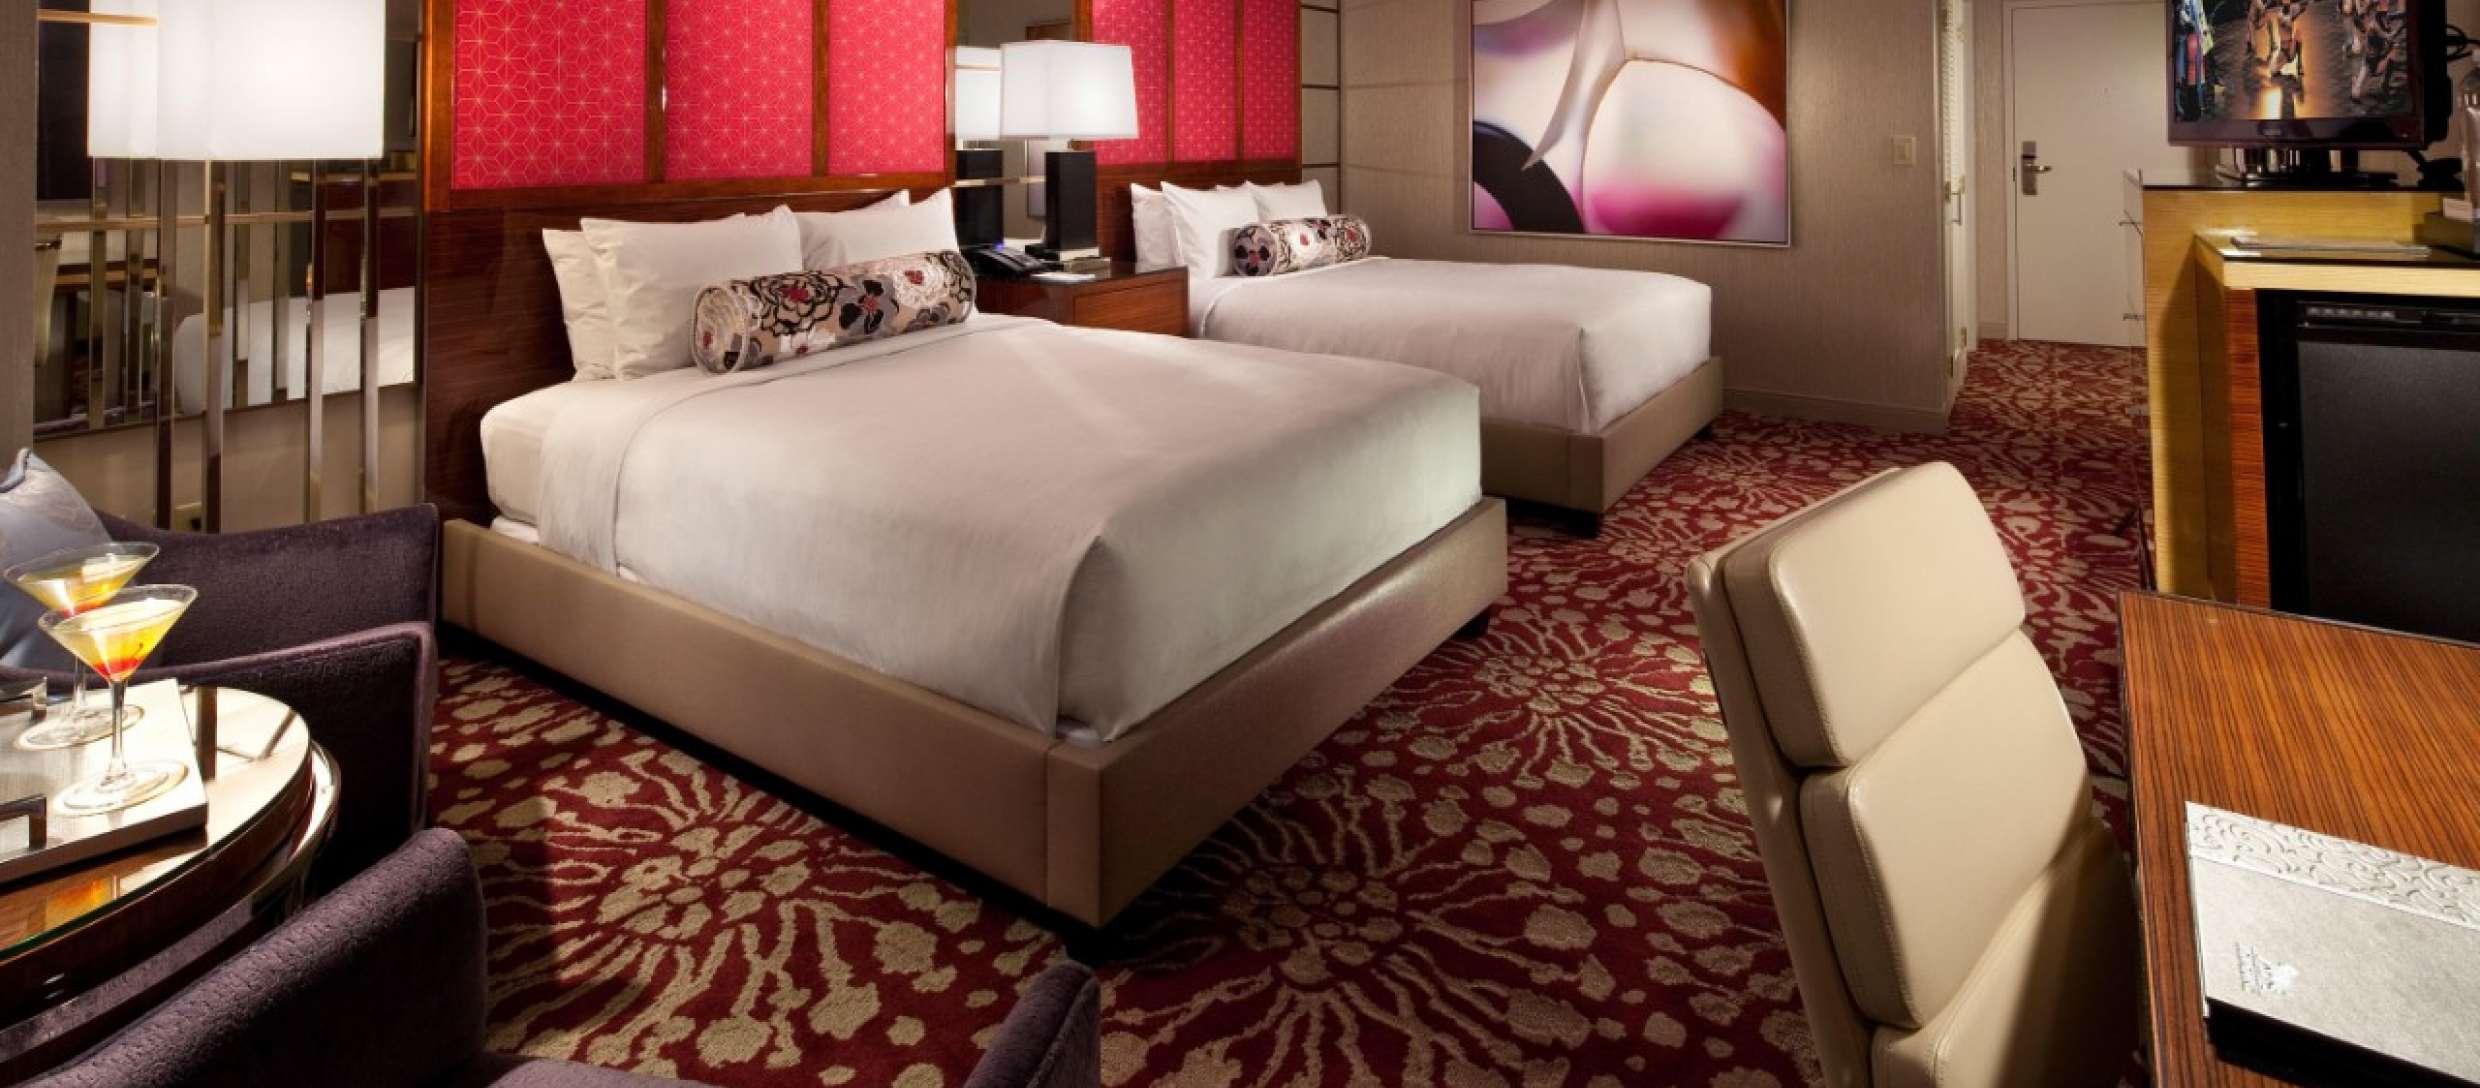 mgm-grand-hotel-rooms-grand-queen-bedroom-@2x.jpg.image.2480.1088.high